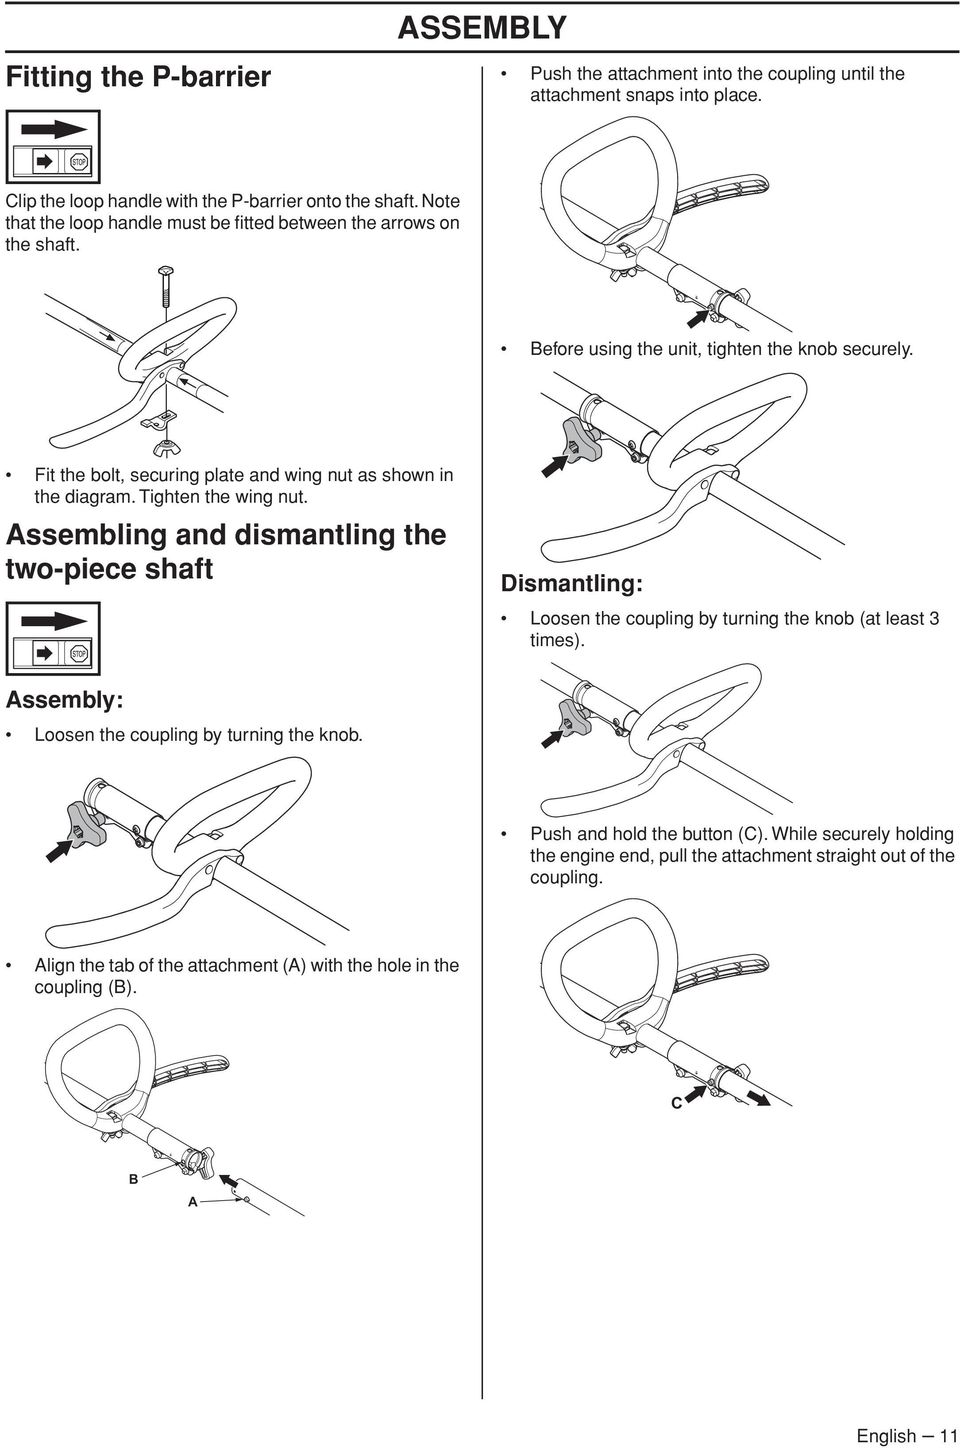 Fit the bolt, securing plate and wing nut as shown in the diagram. Tighten the wing nut.